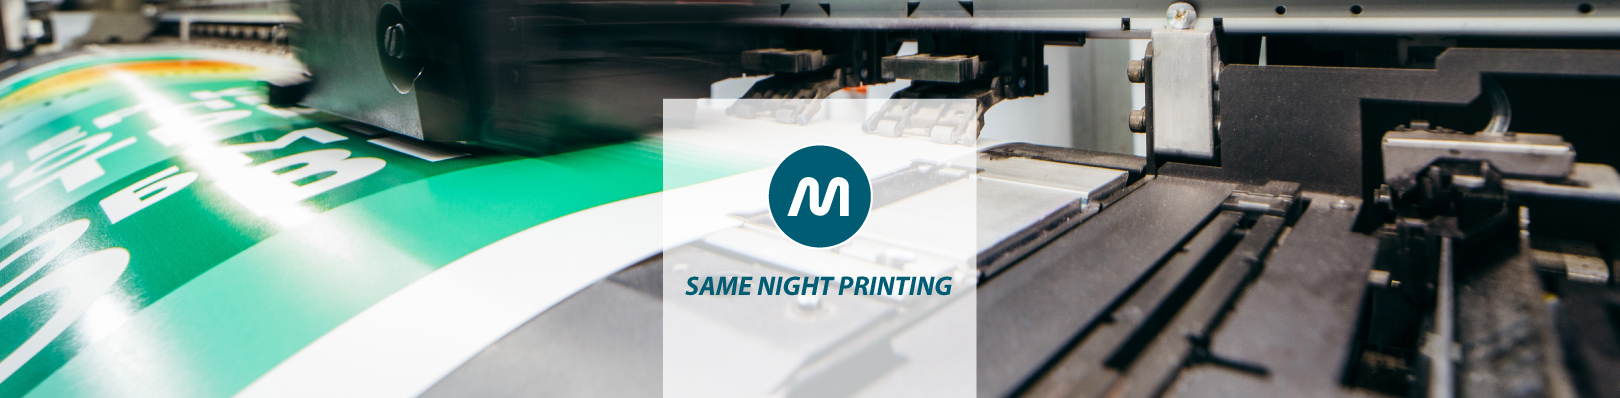 Same night printing products in Germany with HMi banner for website | Order printing products in Germany with same night delivery in Düsseldorf